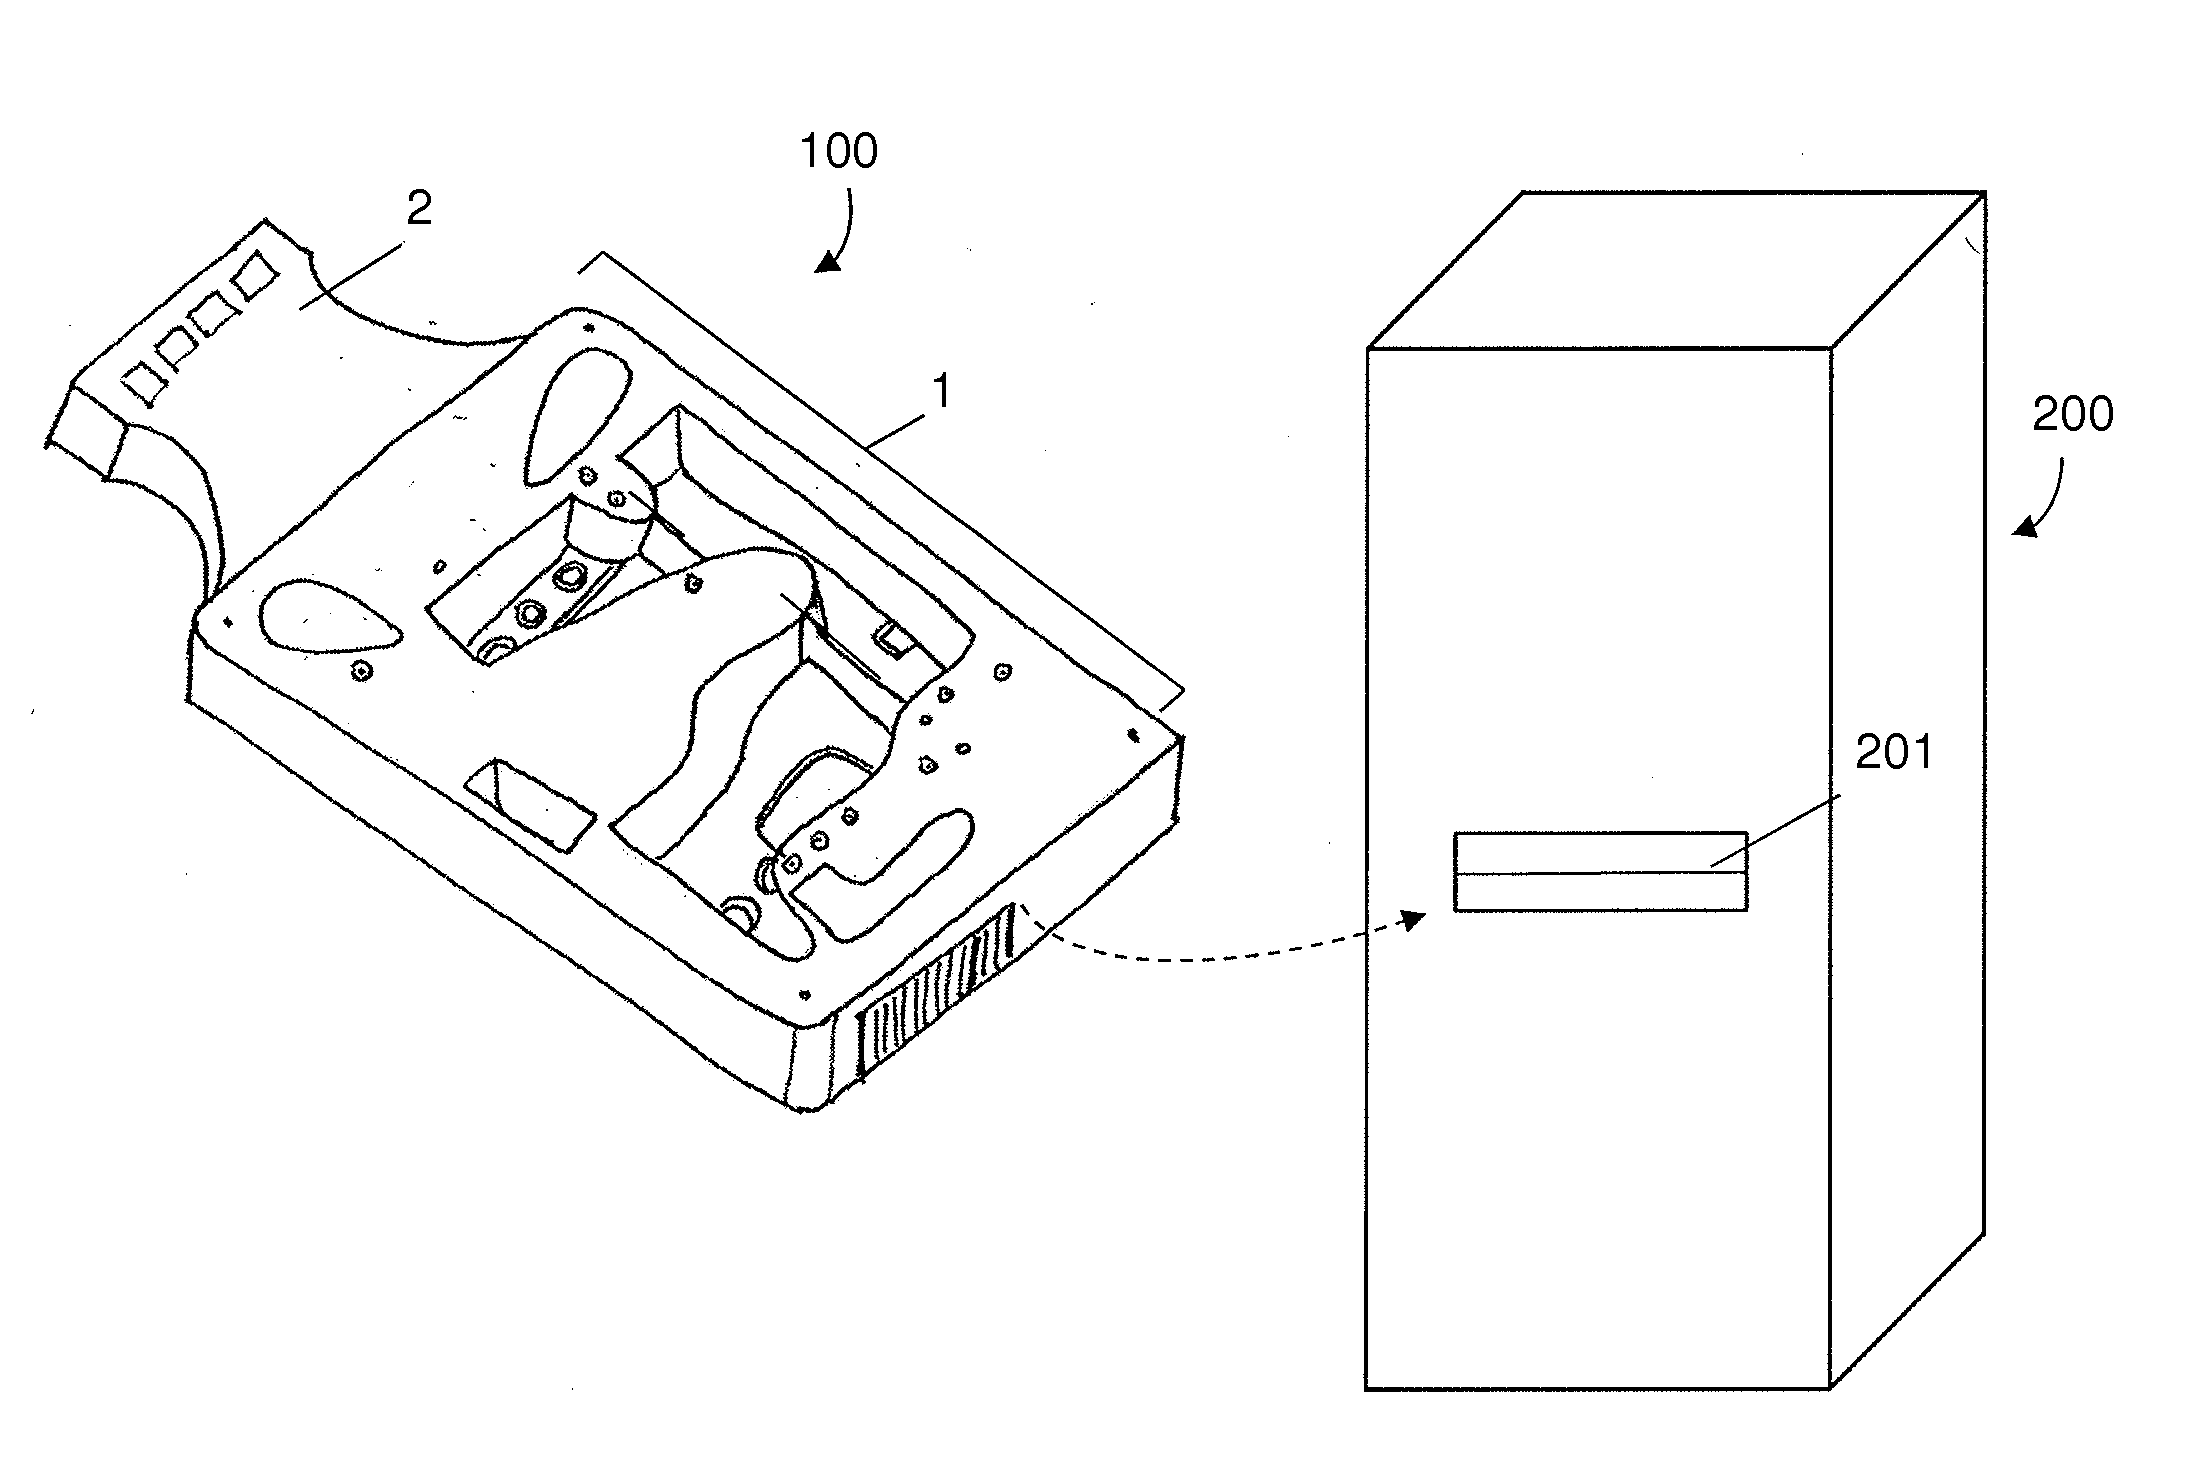 Microfluidic cartridge devices and methods of use and assembly